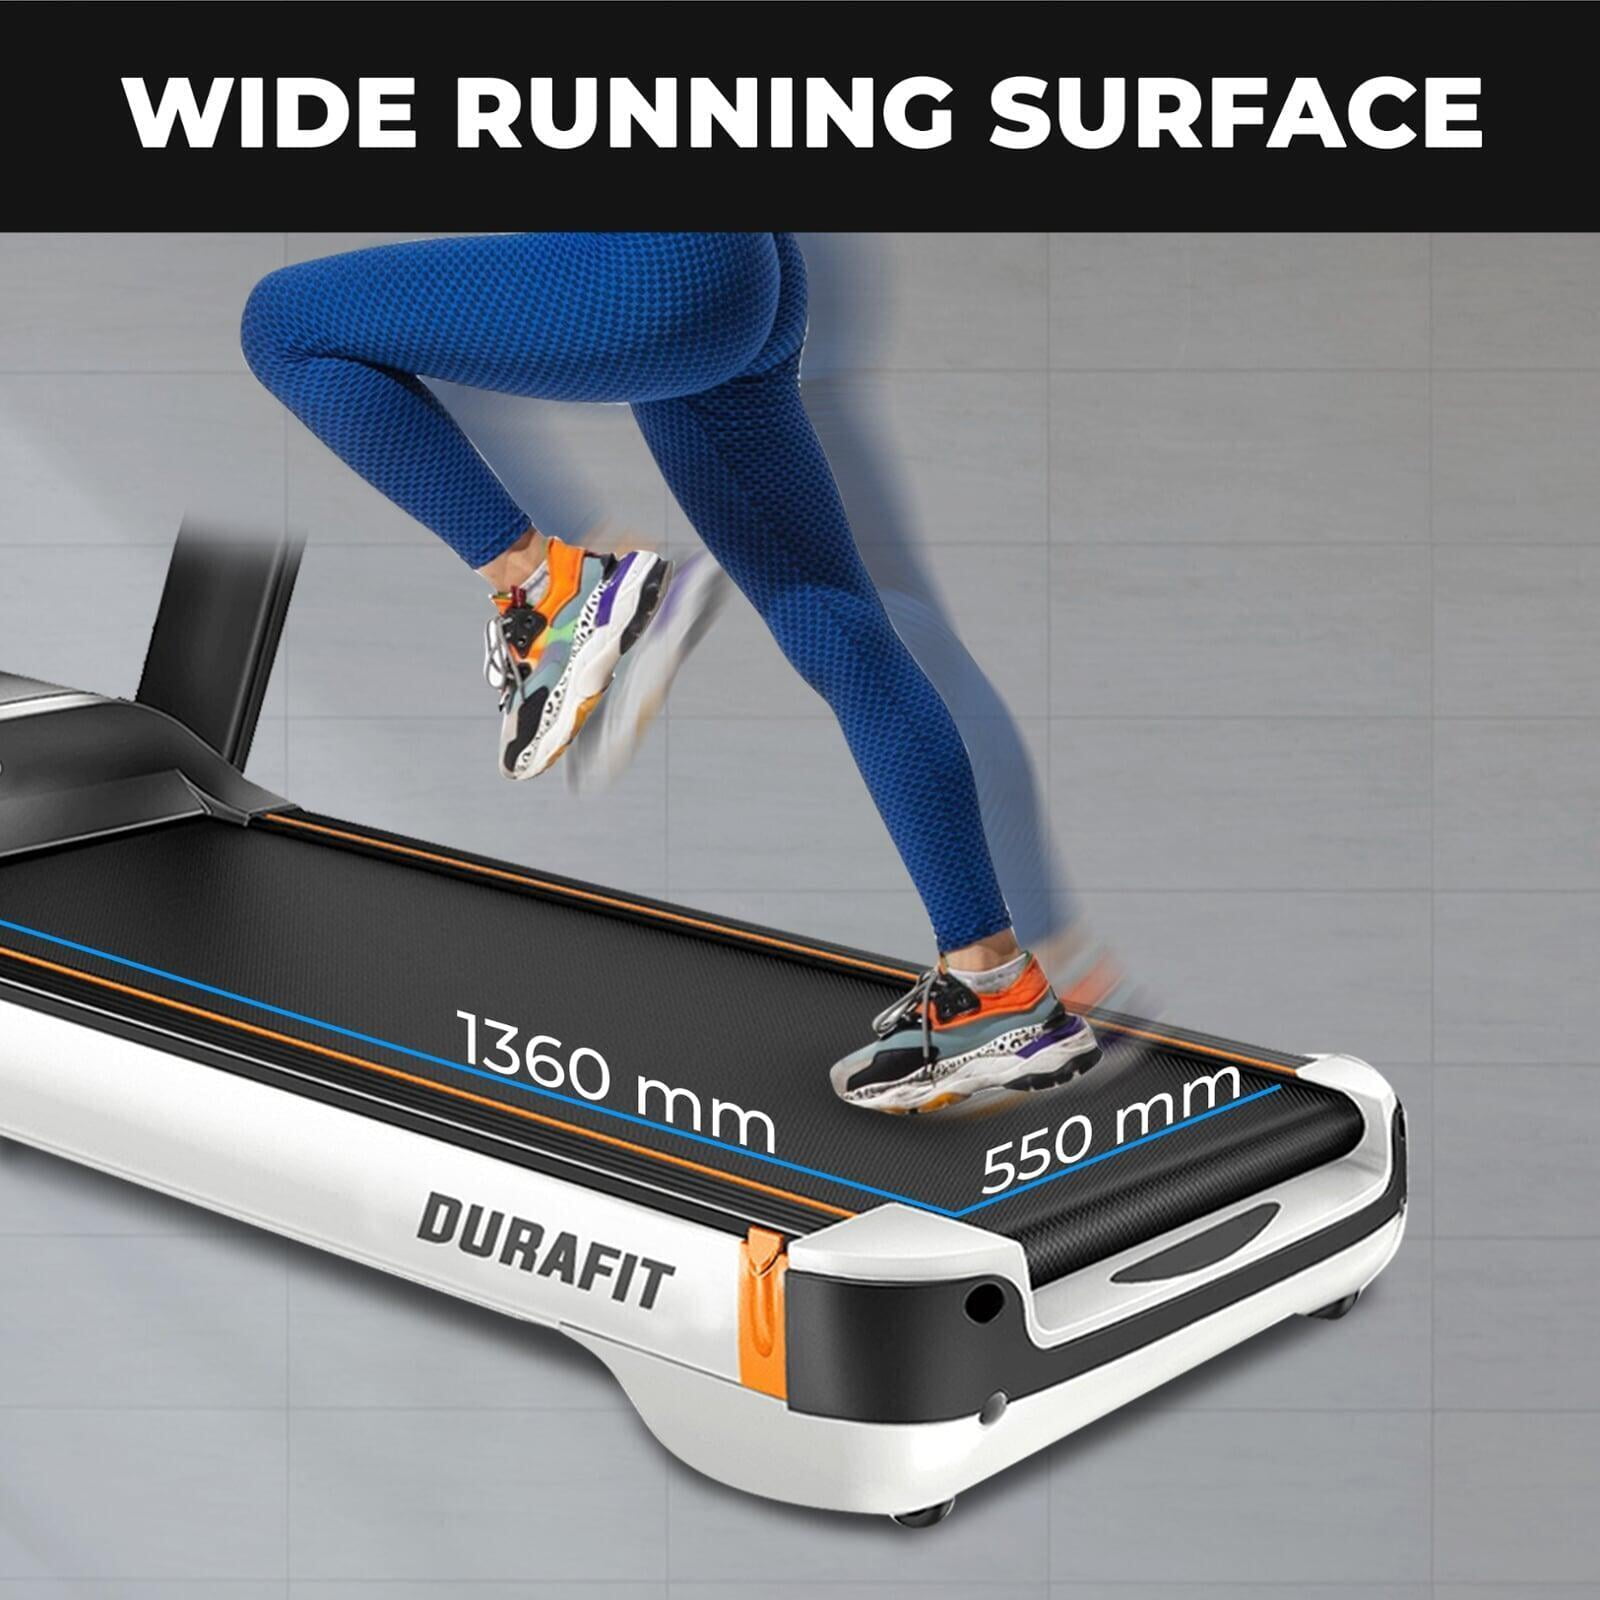 Durafit Focus Treadmill with Wide Running Surface